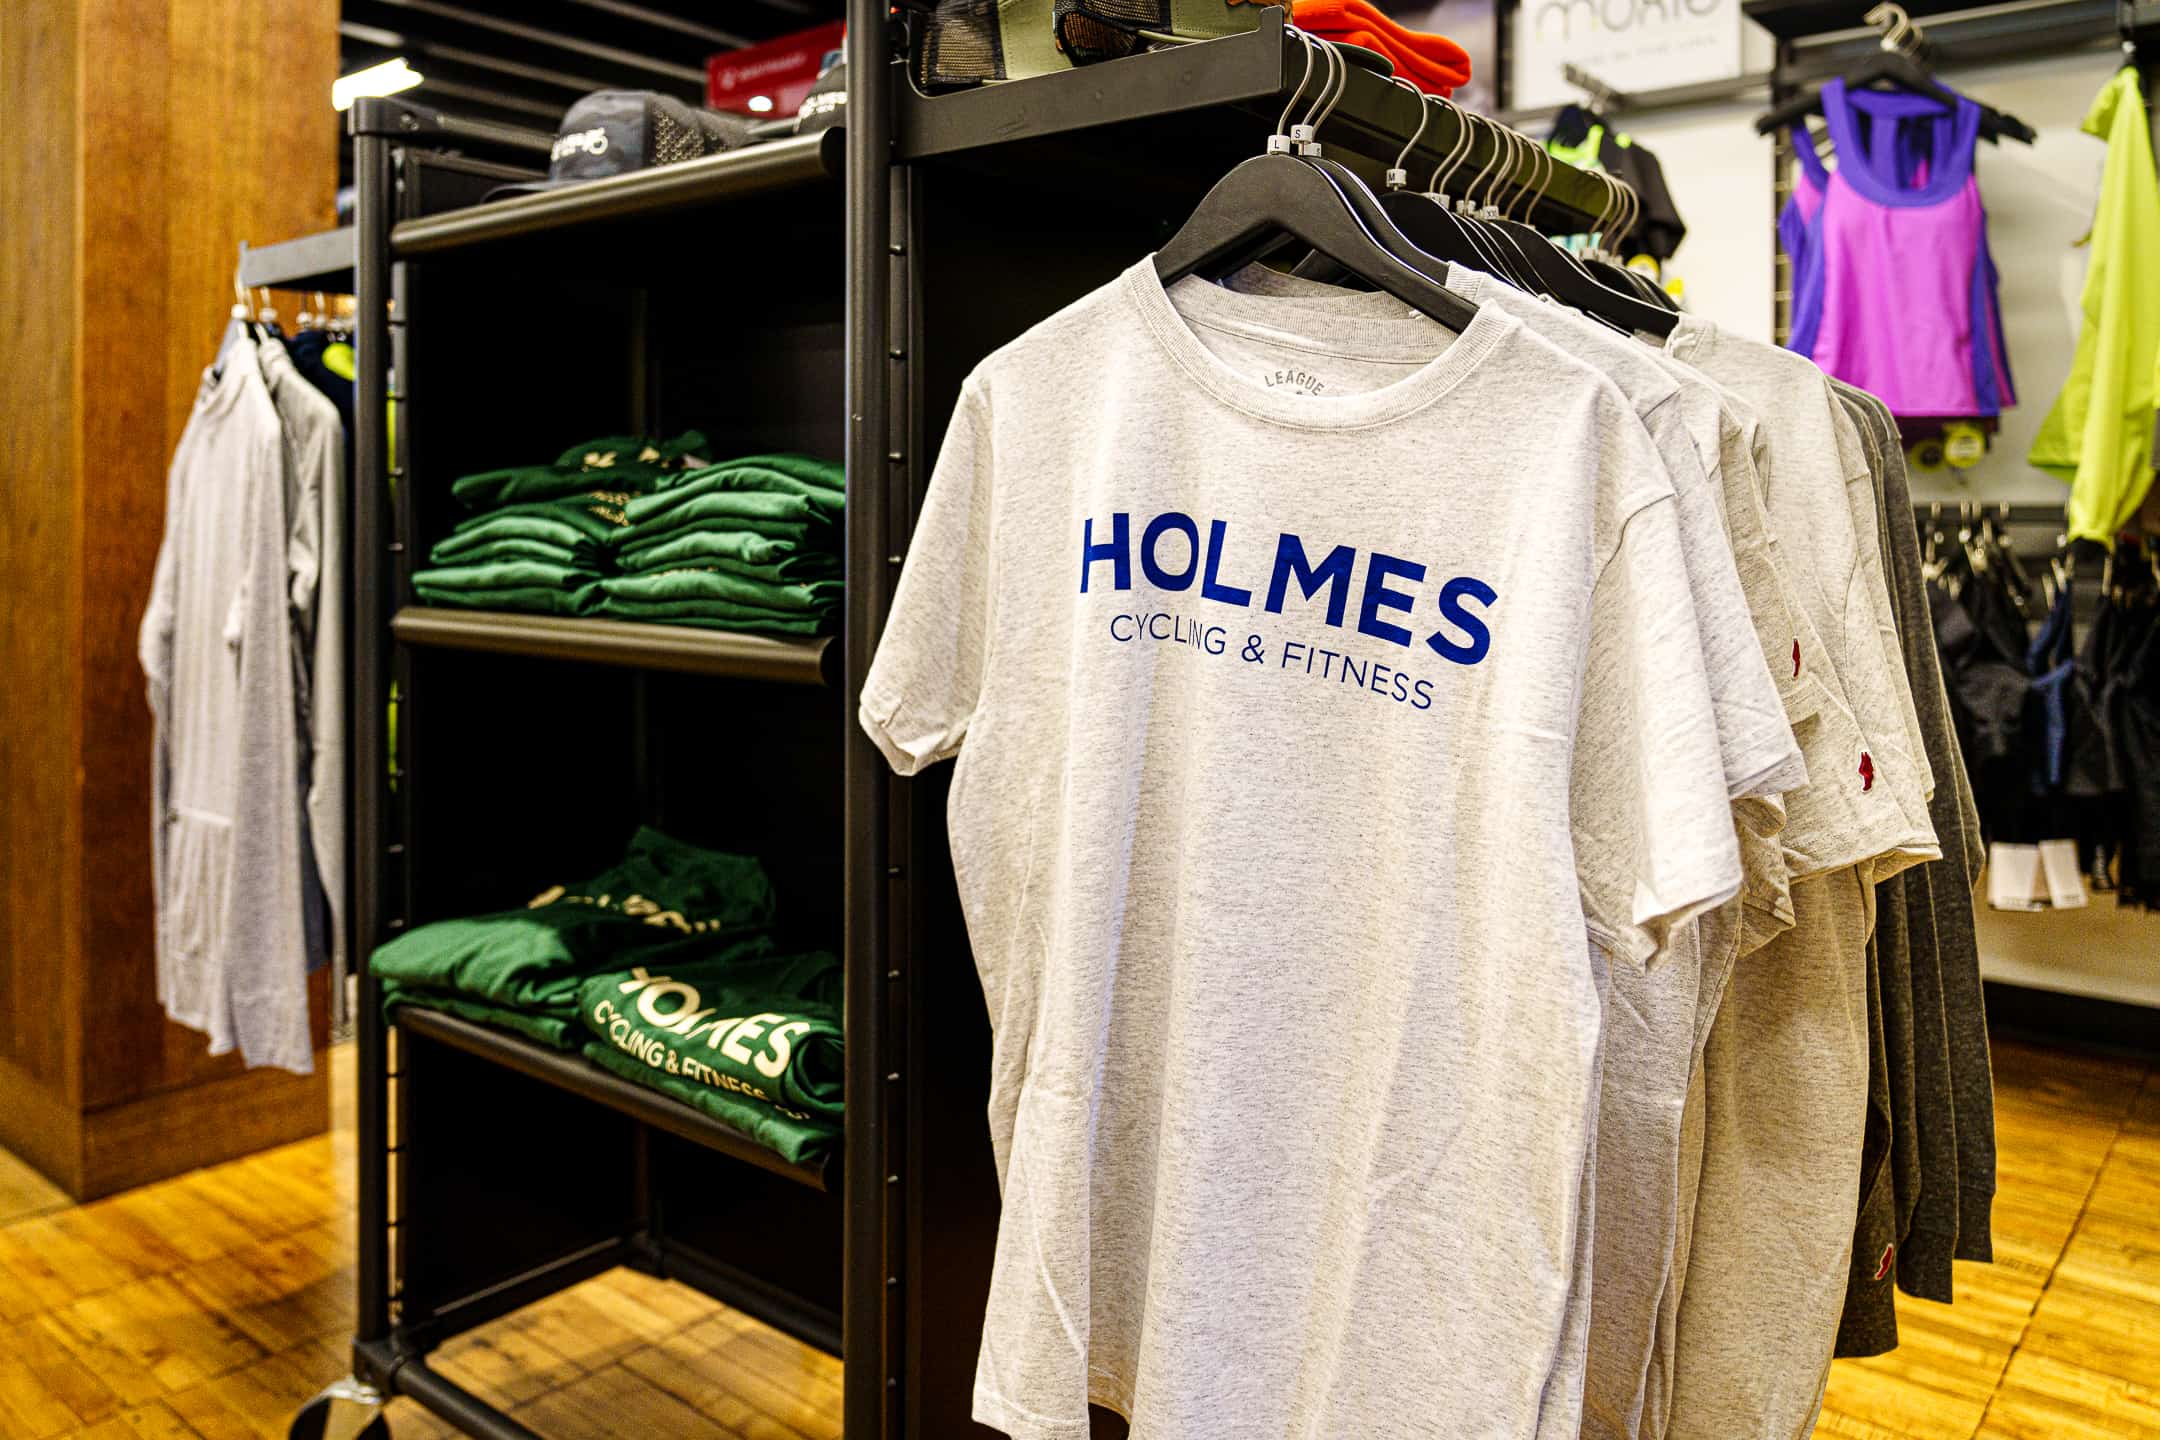 Holmes Cycling & Fitness